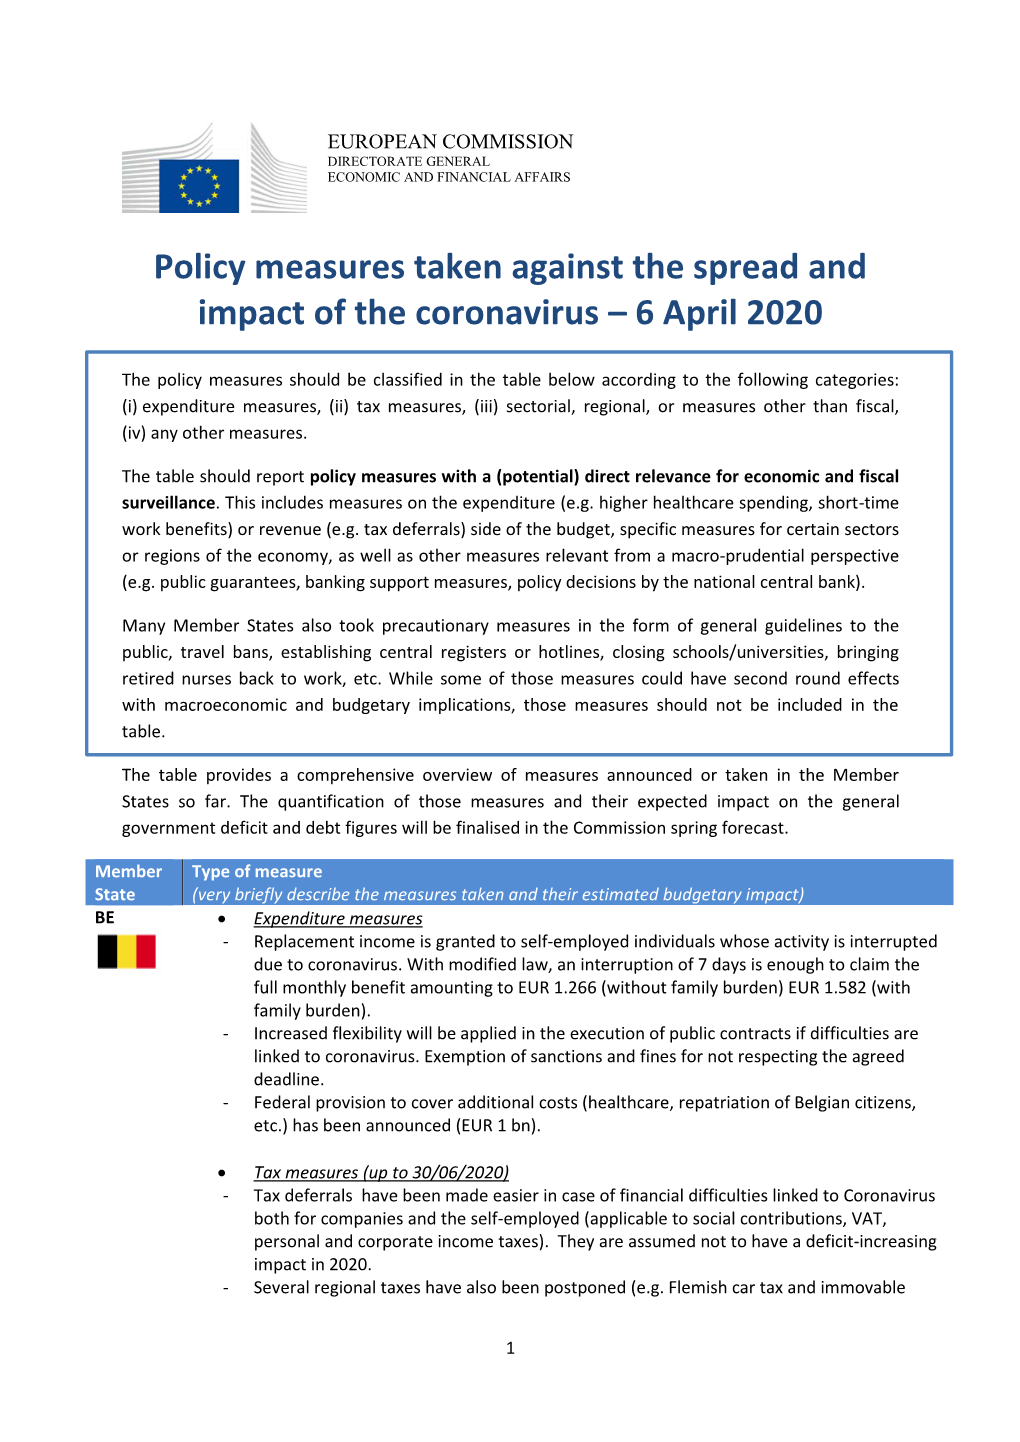 Policy Measures Taken Against the Spread and Impact of the Coronavirus – 6 April 2020